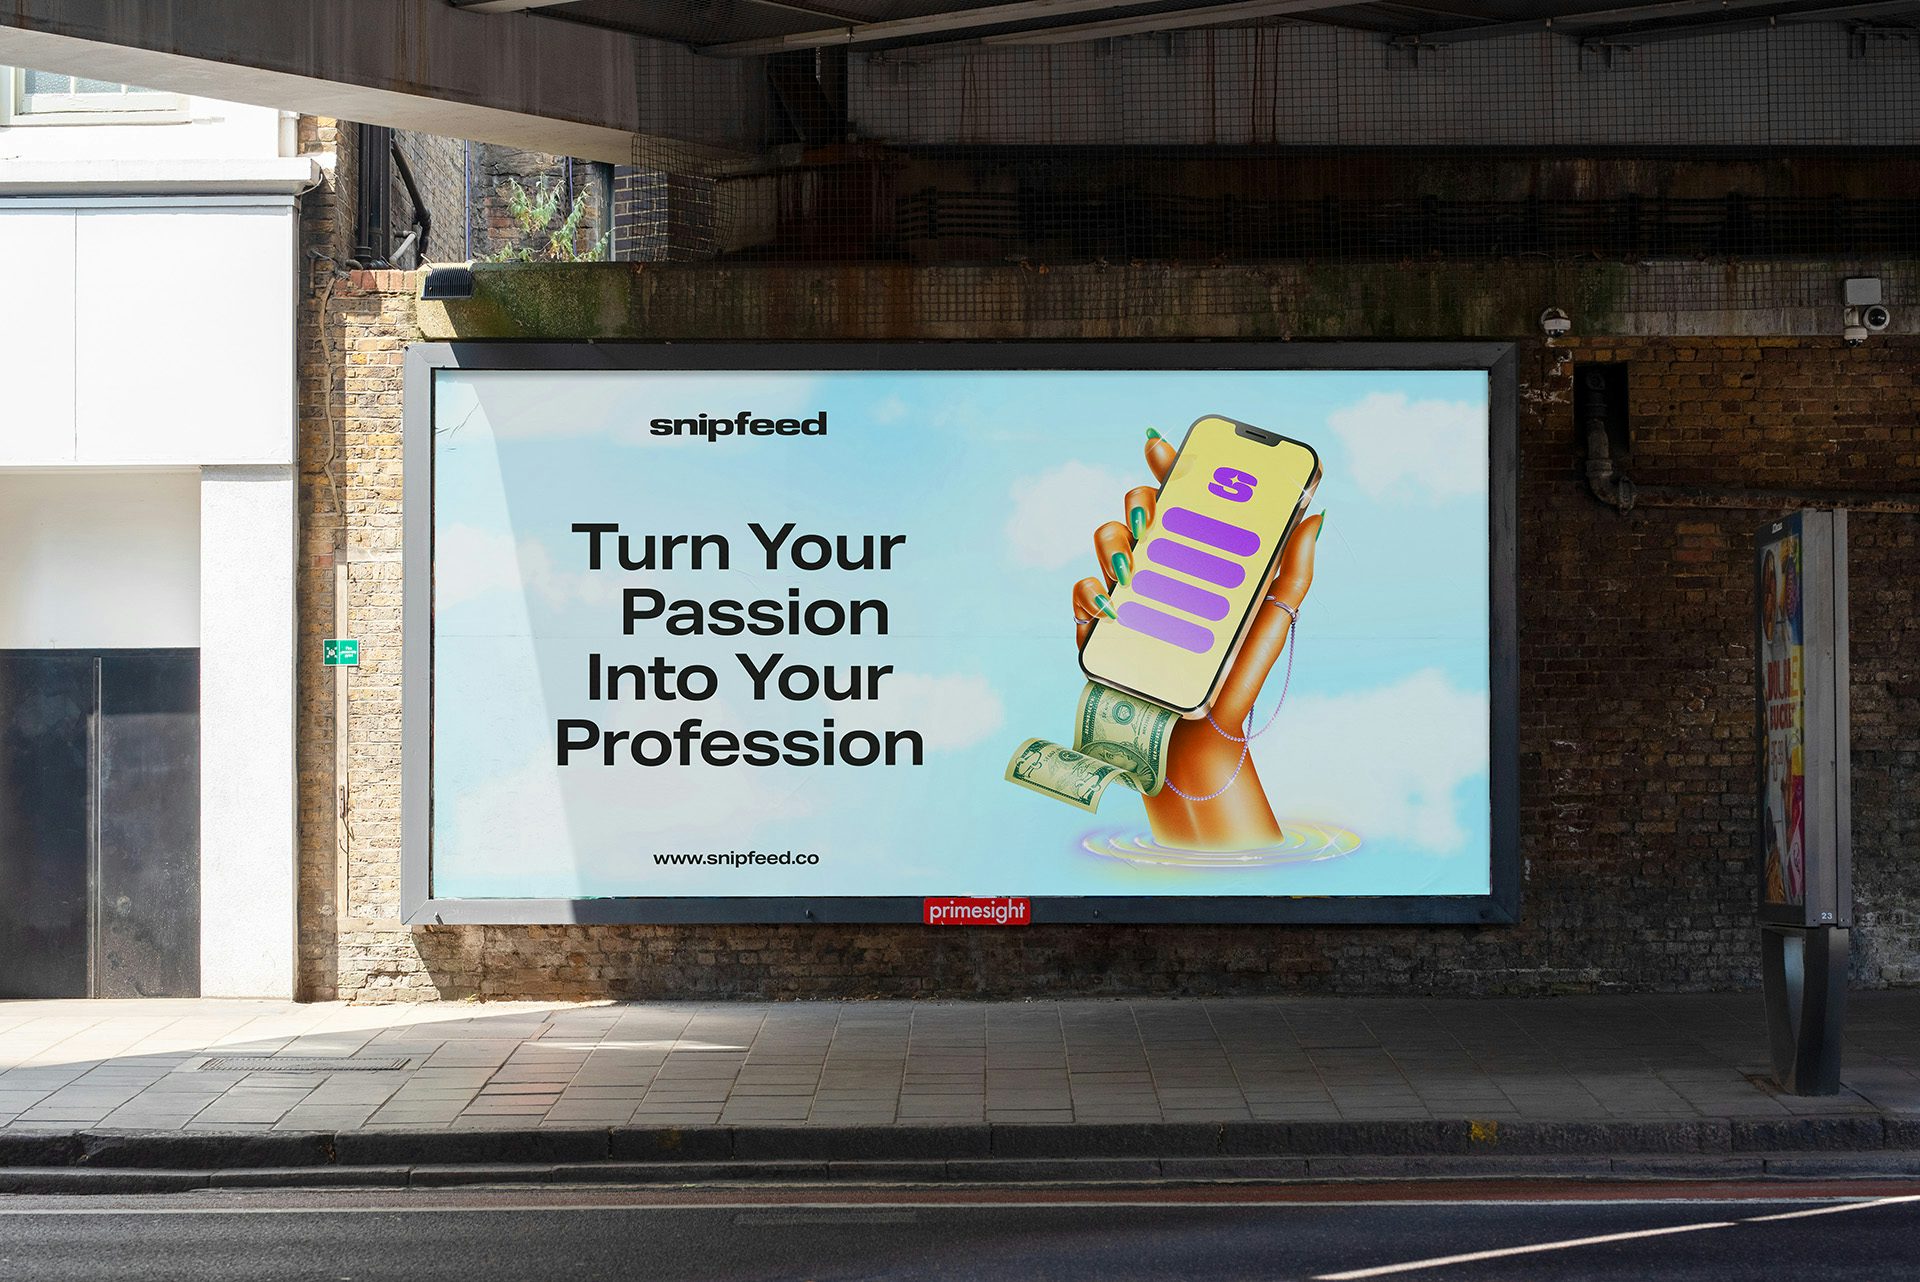 Image shows out-of-home advertising of Snipfeed, which reads 'Turn your passion into your profession'